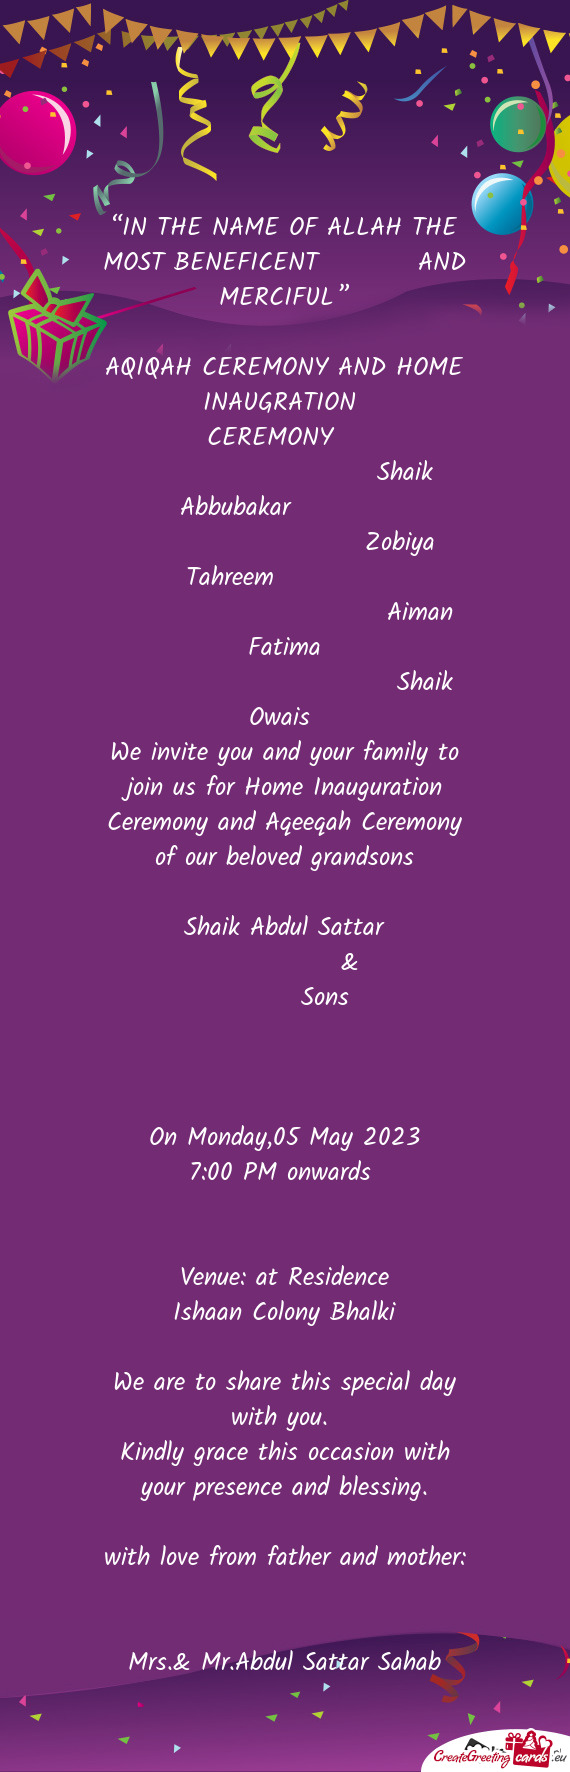 AQIQAH CEREMONY AND HOME INAUGRATION